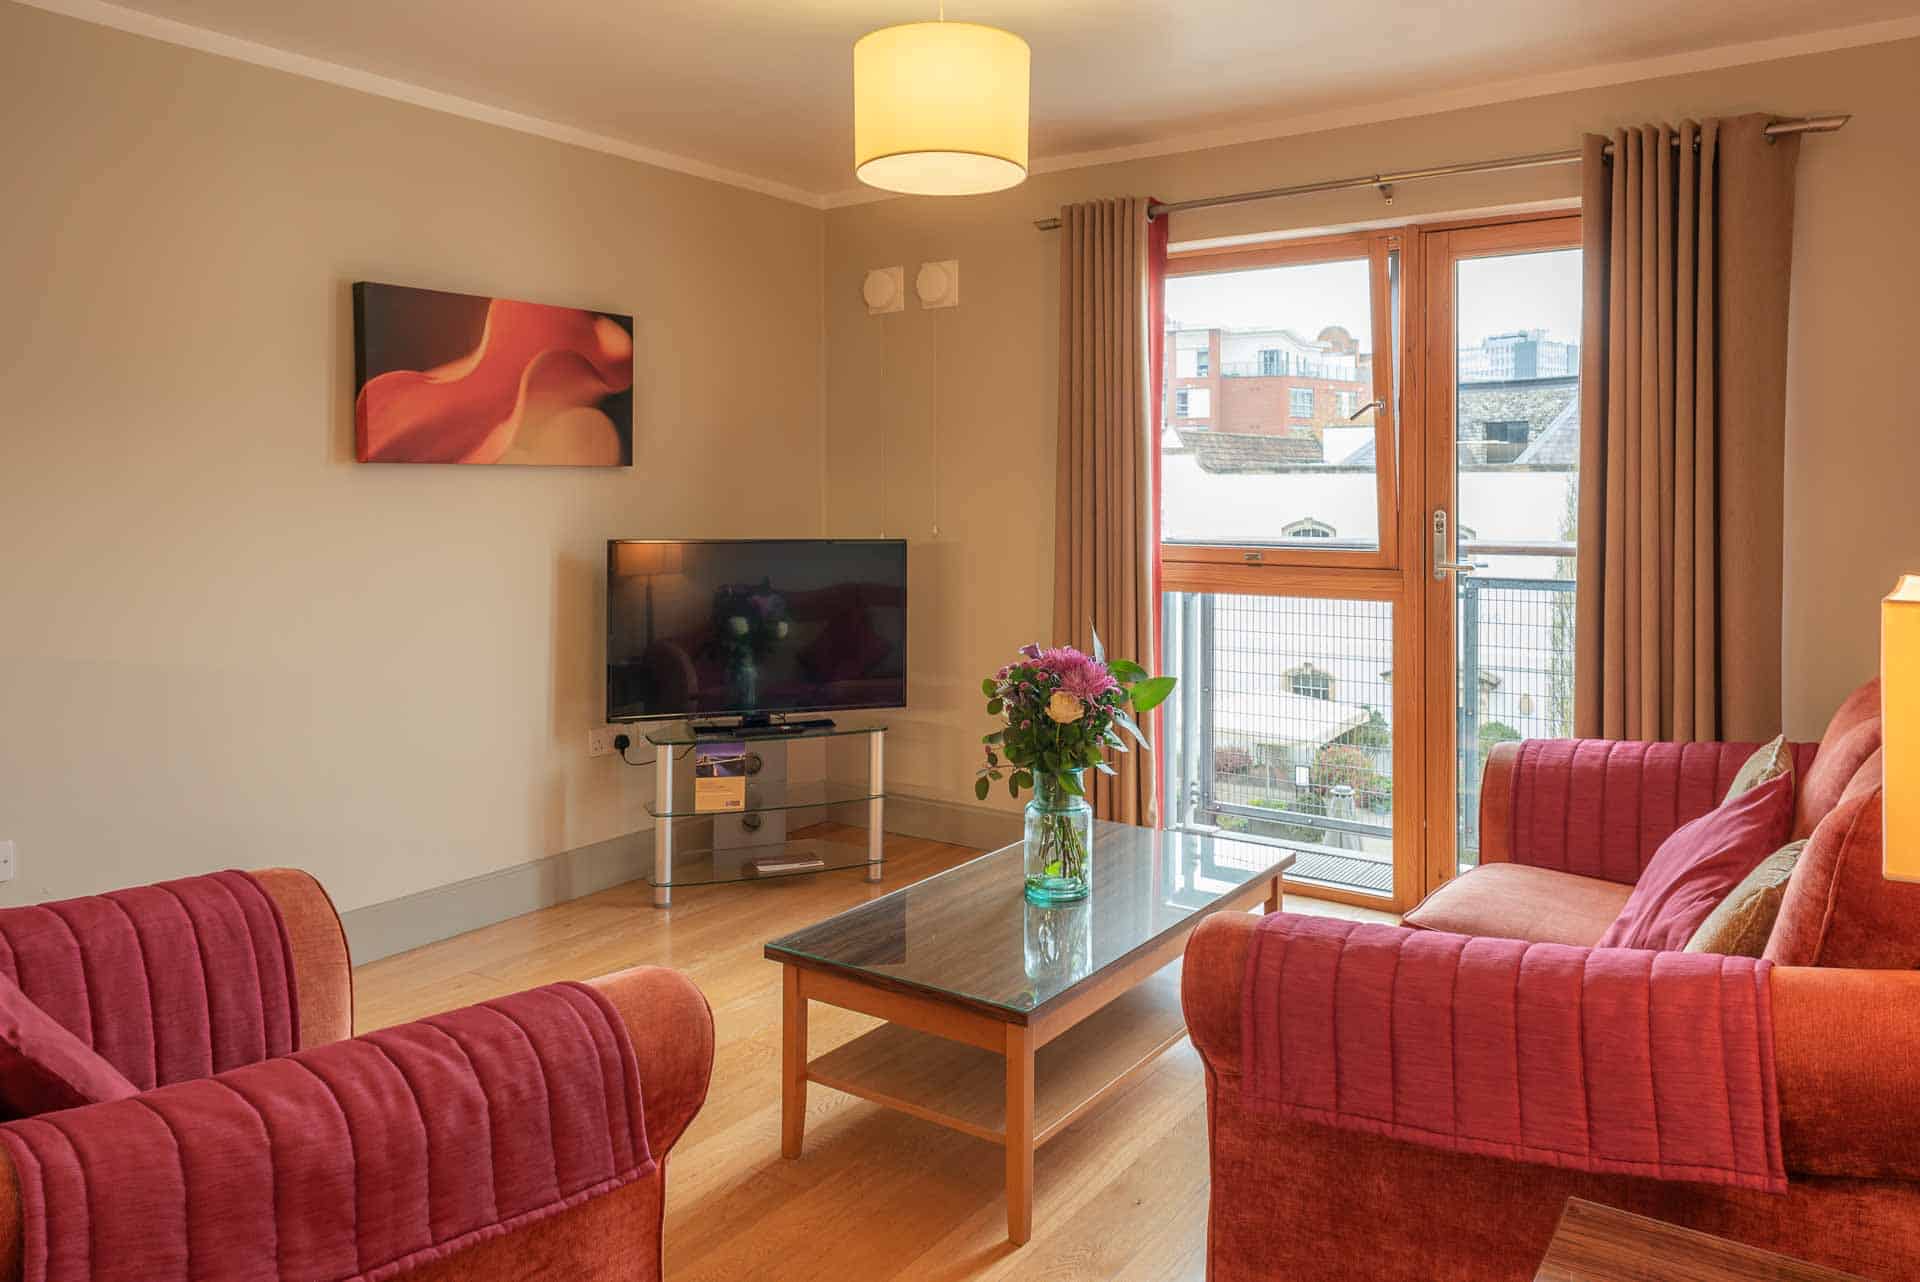 A Safe and Comfortable Serviced Apartment Should Have These Qualities